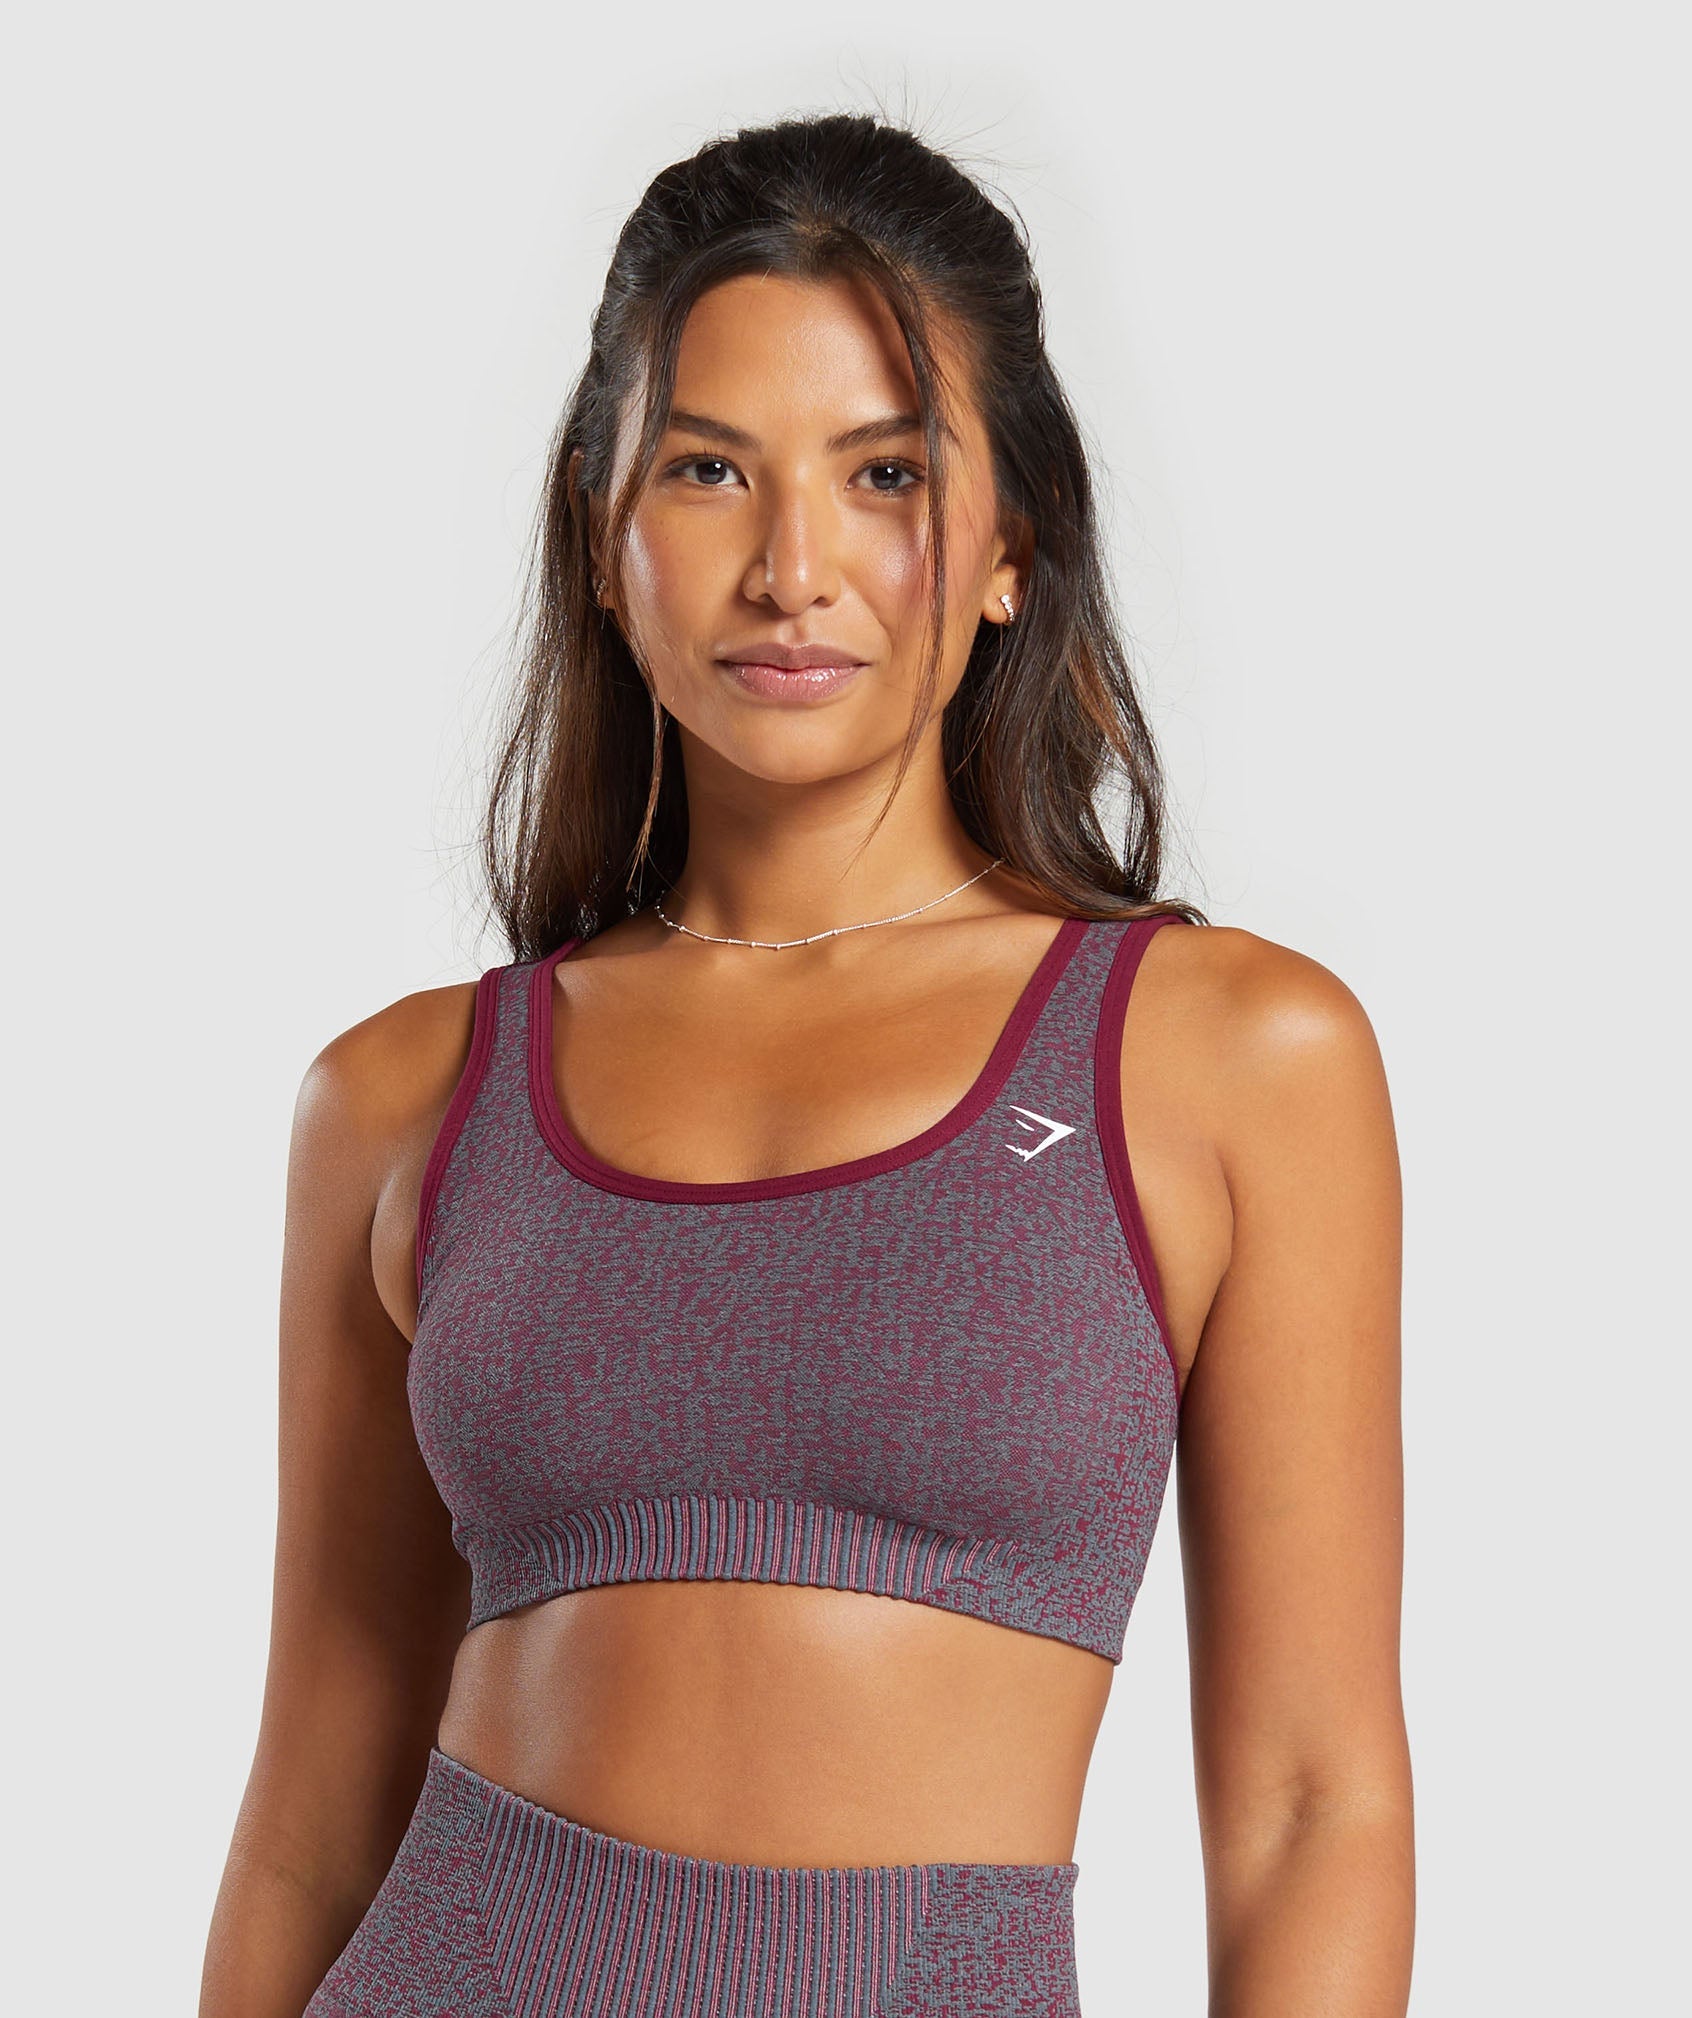 Women's Active Ribbed Macrame Cut Out Sports Bra. (3 PACK)* (XL ONLY)* • Scoop  Neck • Removable padding shapes & supports • Rib knit texture • Macrame cut  out back detail •